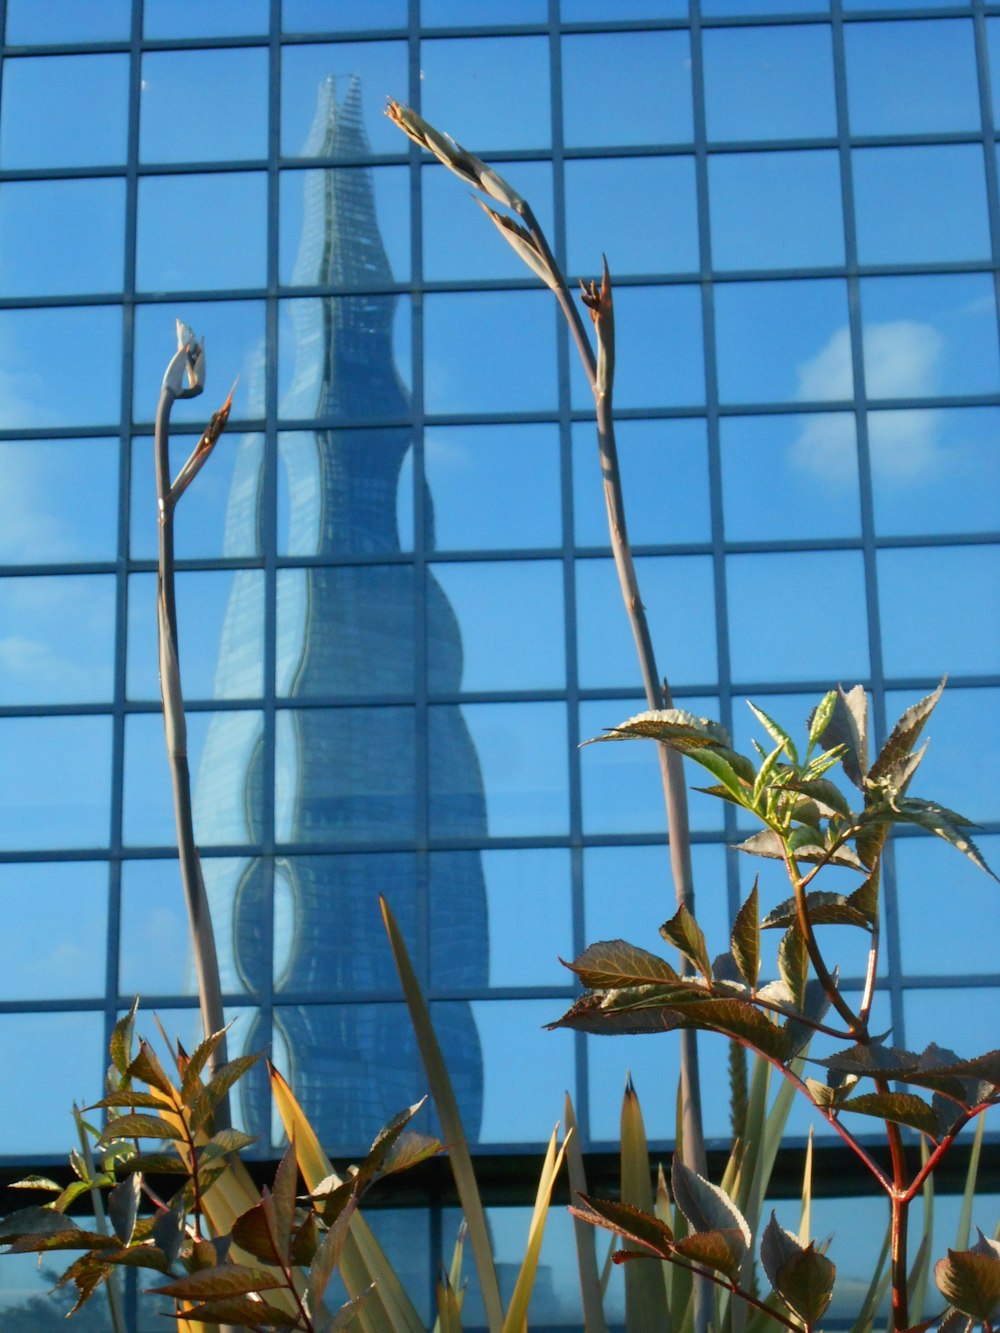 a tall glass building with a tree in front of it